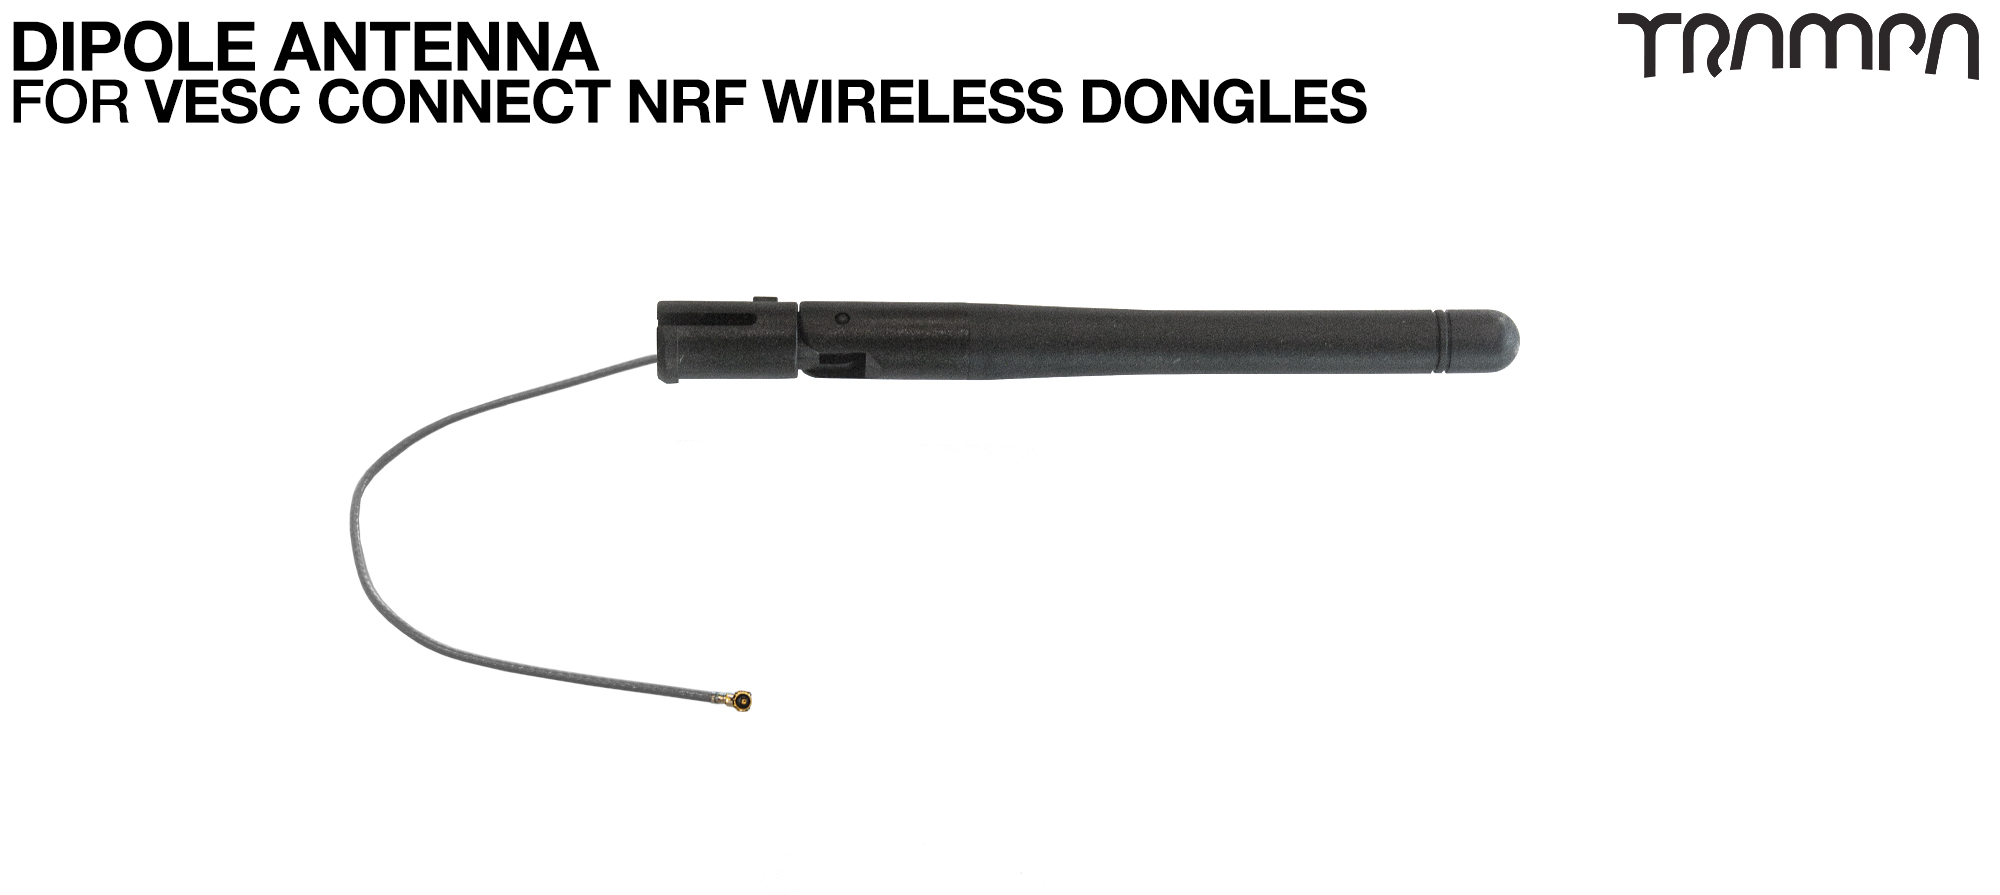 External Dipole Antenna used for boosting connection range for the VESC Connect NRF Dongles